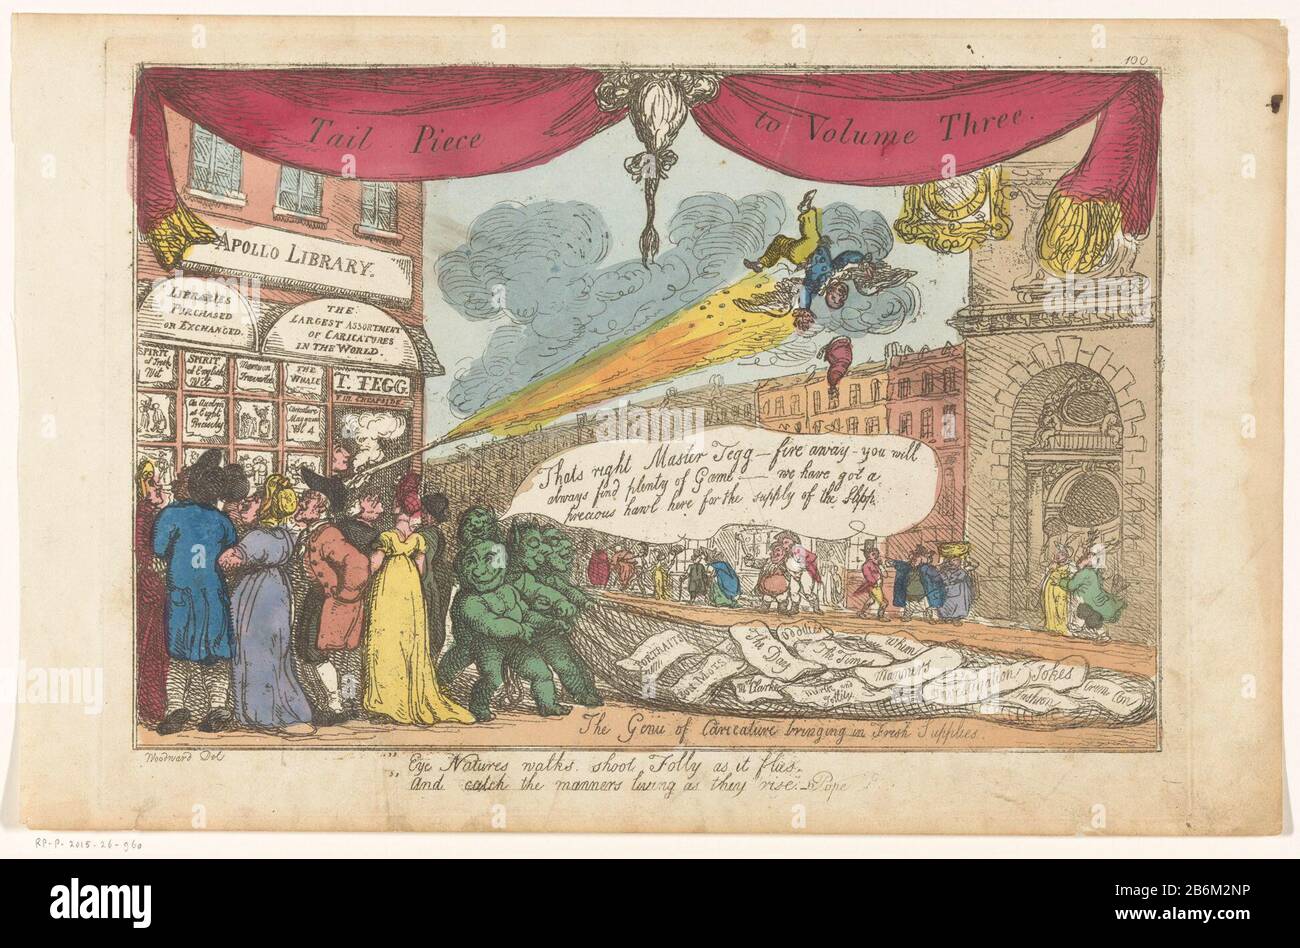 Etalage van uitgever Thomas Tegg te Londen Tail Piece to Volume Three (titel op object) View of a street with crowds to showcase publisher Thomas Tegg, with a rifle, the personification of Folly from air strikes. Four green figures, the genii of the caricature, pulling a net with new inspiration direction of the publishing. Right tower of St Mary-le-Bow. Among print a two-line verse of Alexander Pope. Manufacturer : printmaker Thomas Rowlandsonnaar drawing: George Moutard Woodward (listed building) Publisher: Thomas TeggPlaats manufacture: London Date: on or after 1819 Physical features: etchi Stock Photo